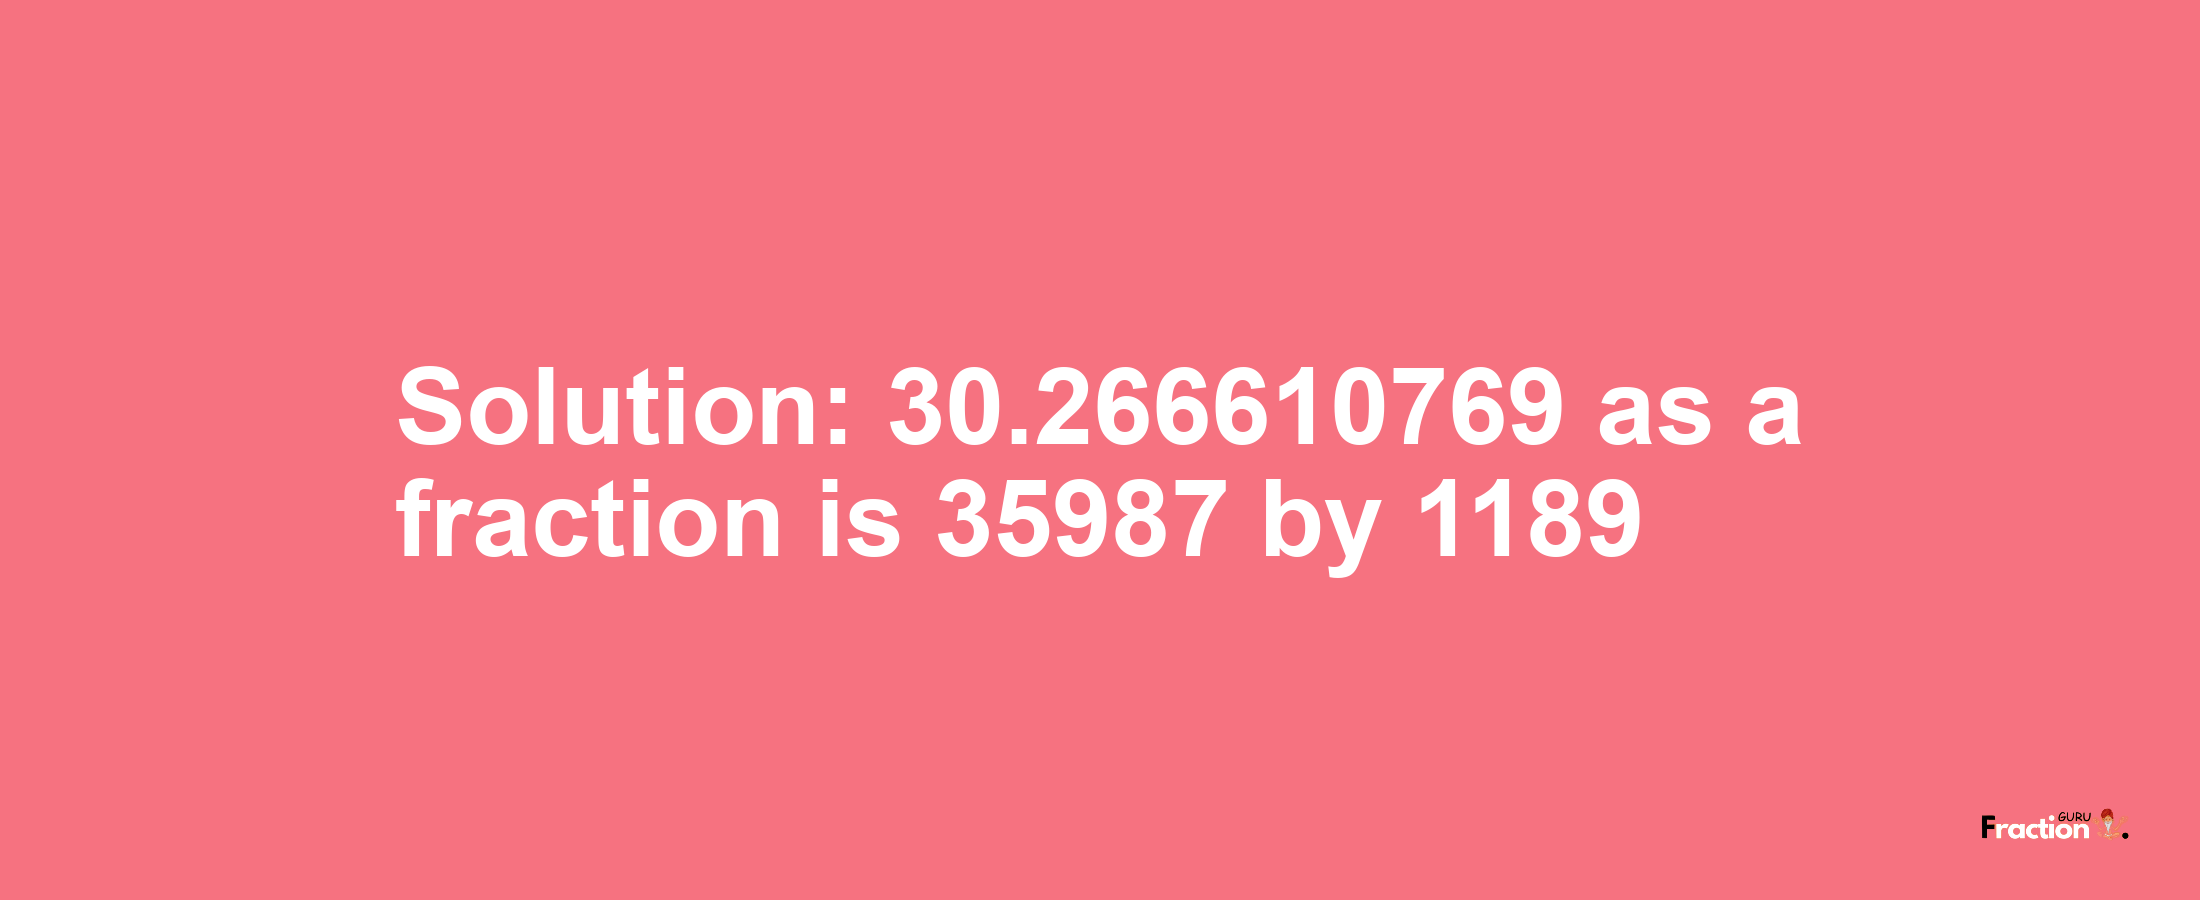 Solution:30.266610769 as a fraction is 35987/1189